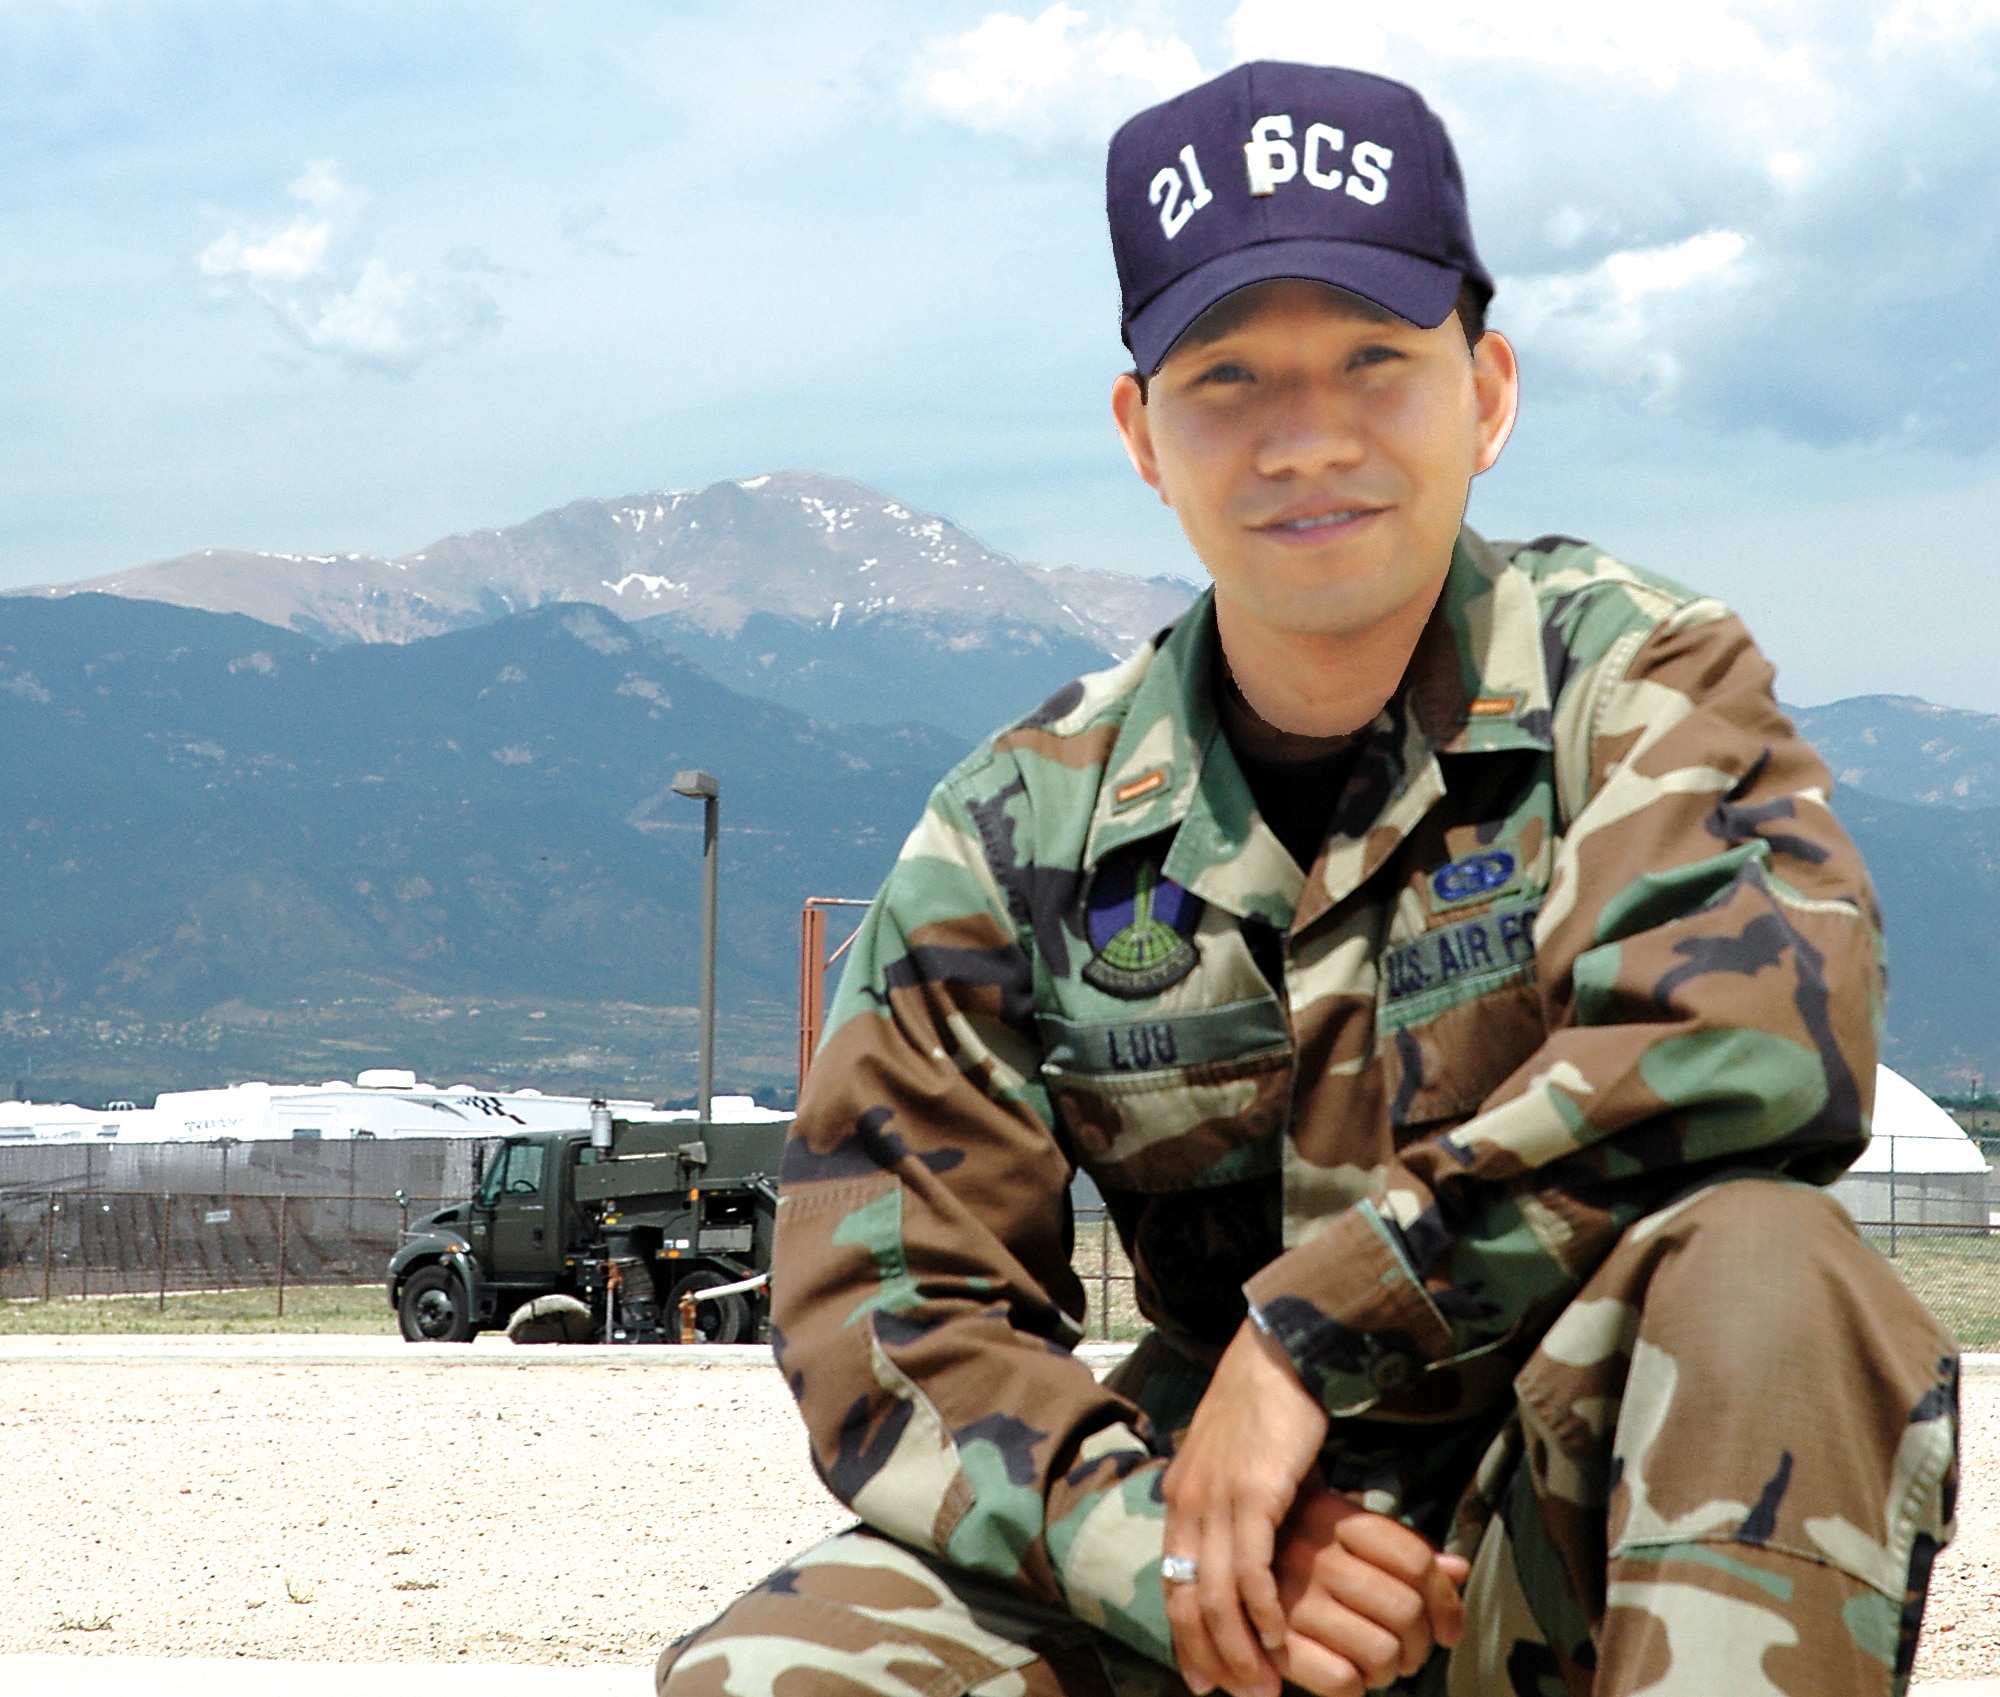 PETERSON AIR FORCE BASE, Colo. -- Second Lieutenant Duc Tien Luu fled Vietnam when he was 11 years old.  He is assigned to the 21st Space Communications Squadron here.  (U.S. Air Force photo by Jeff Adcox)